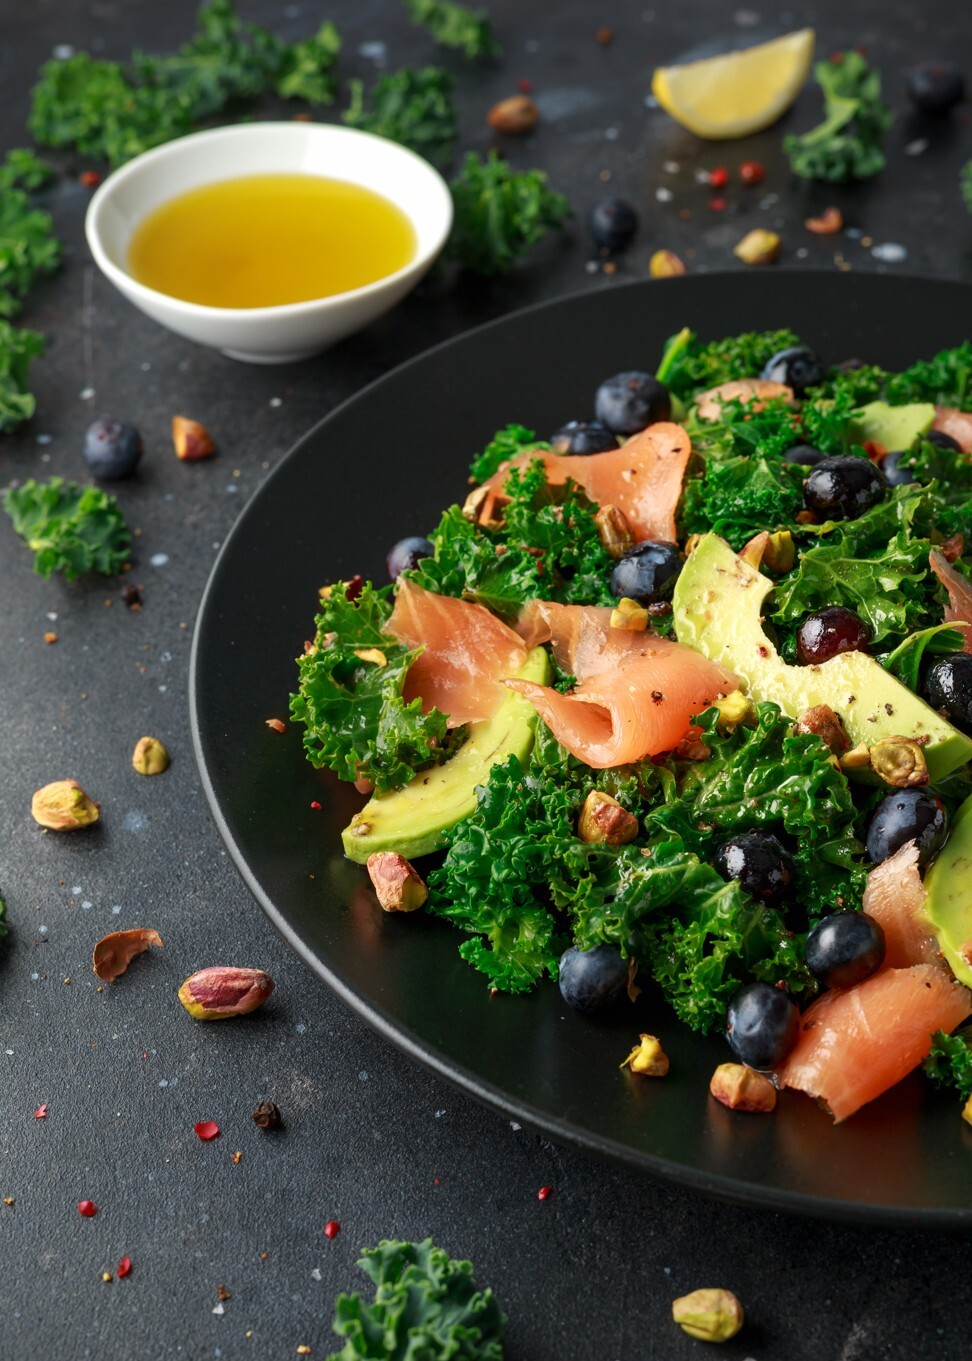 Kale is another important food in the Sirtfood diet. Photo: Shutterstock